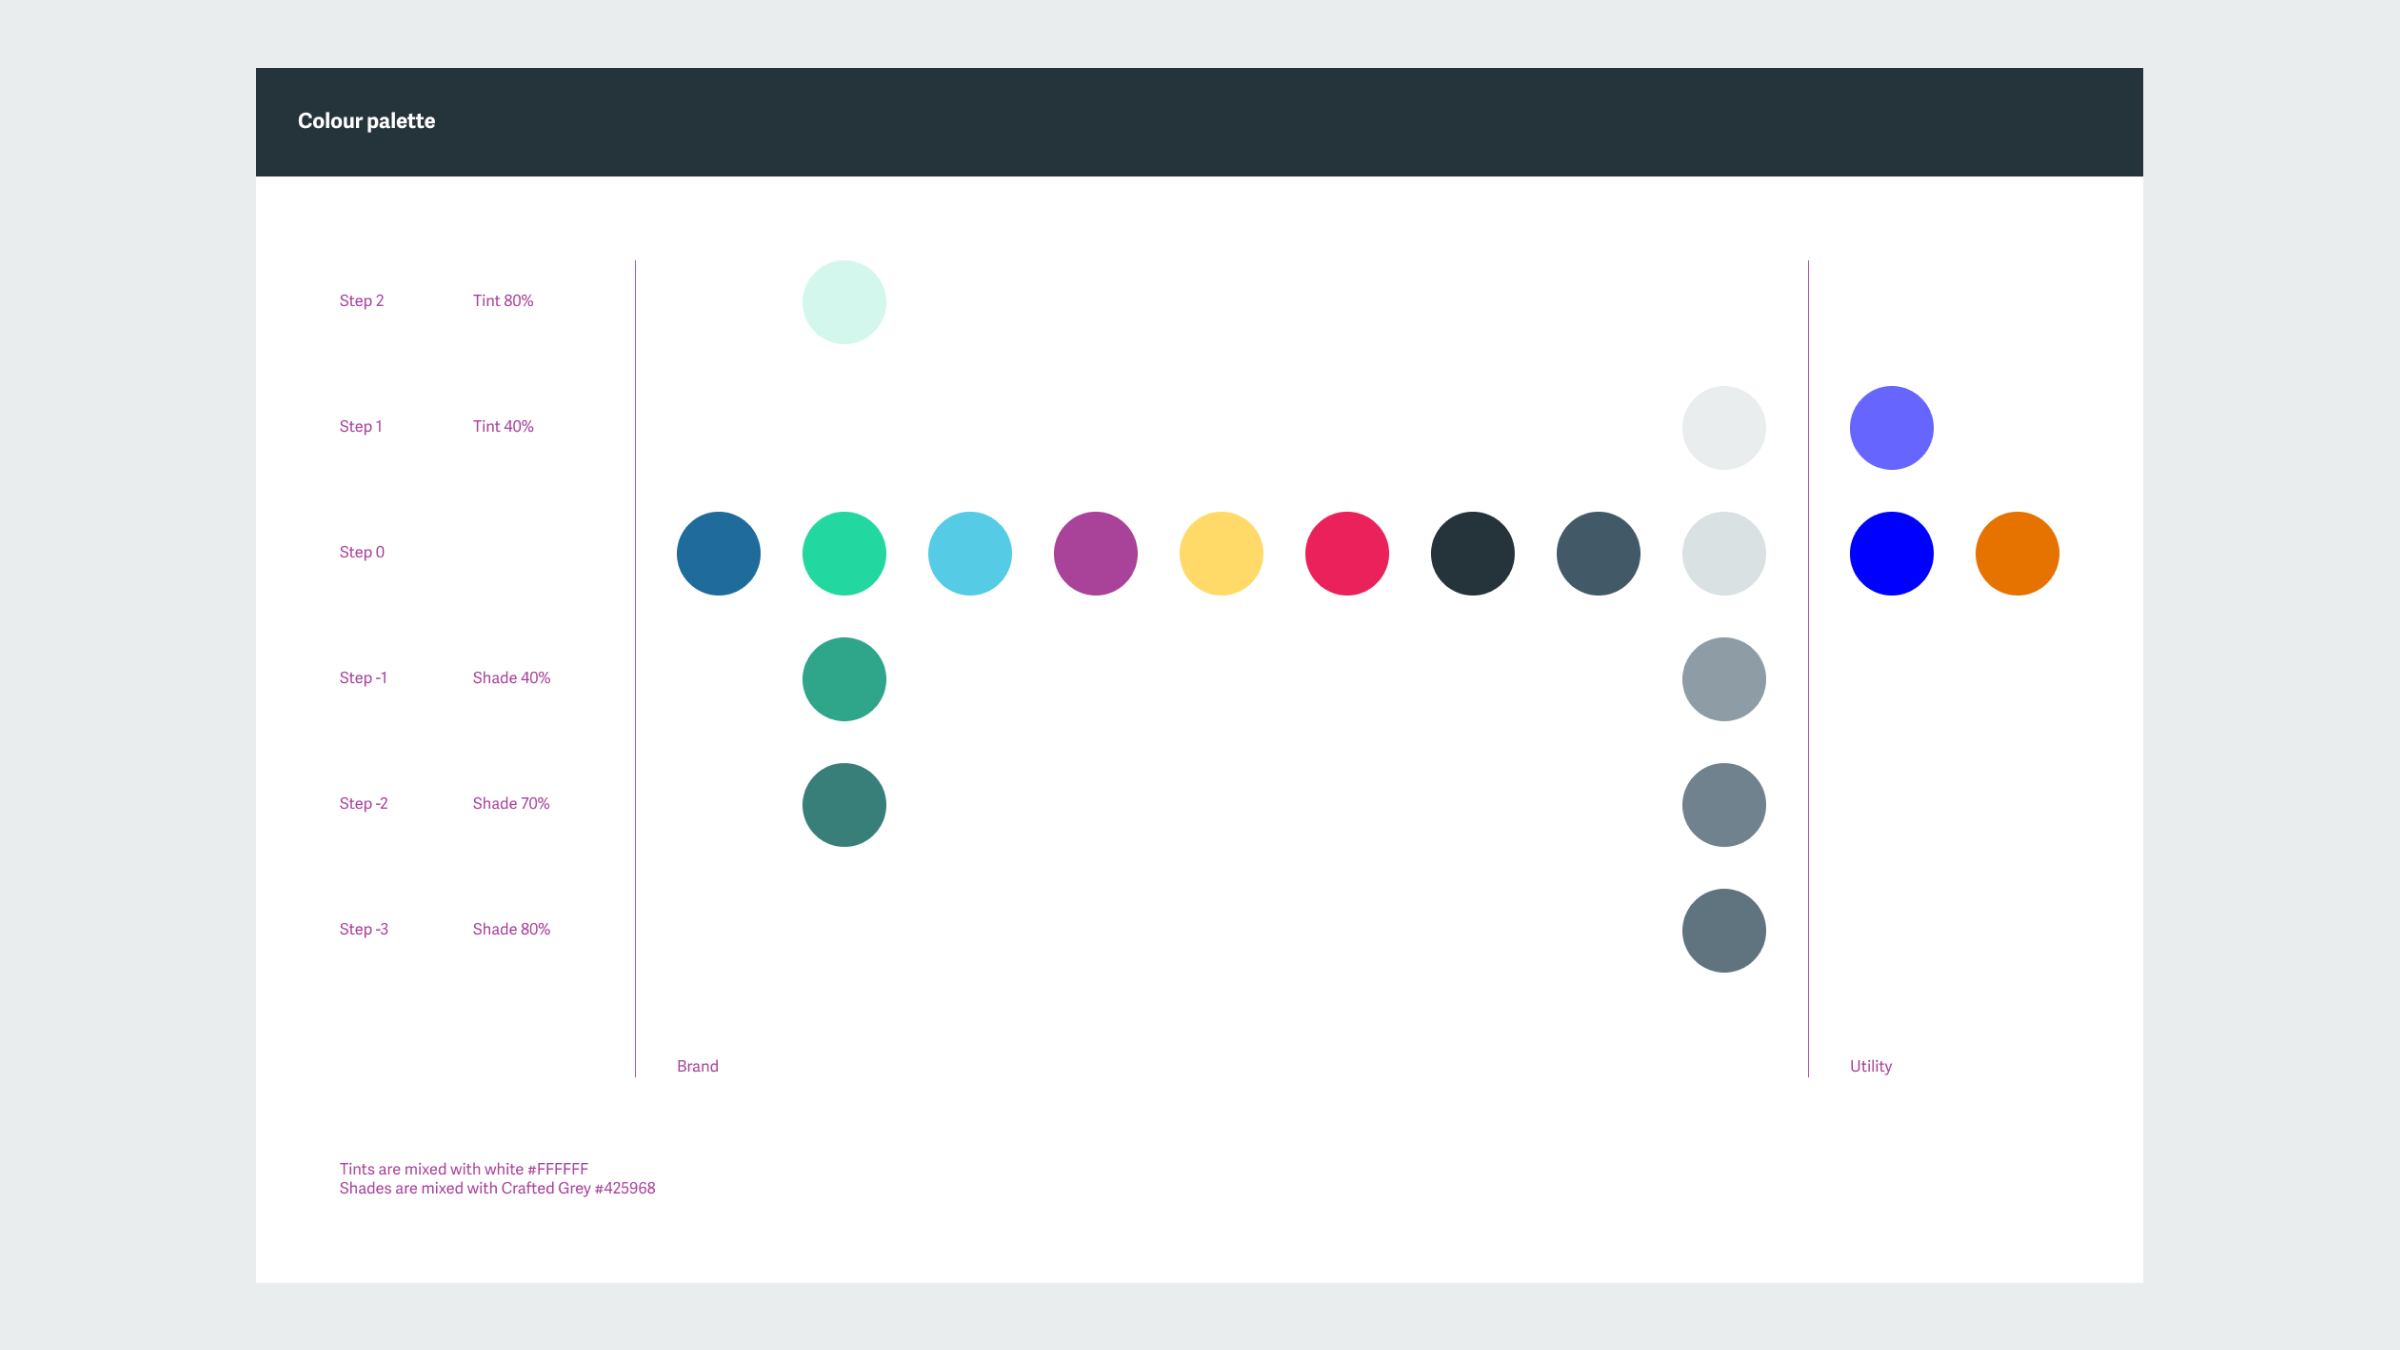 A Figma screenshot showing Clearleft's colour palette